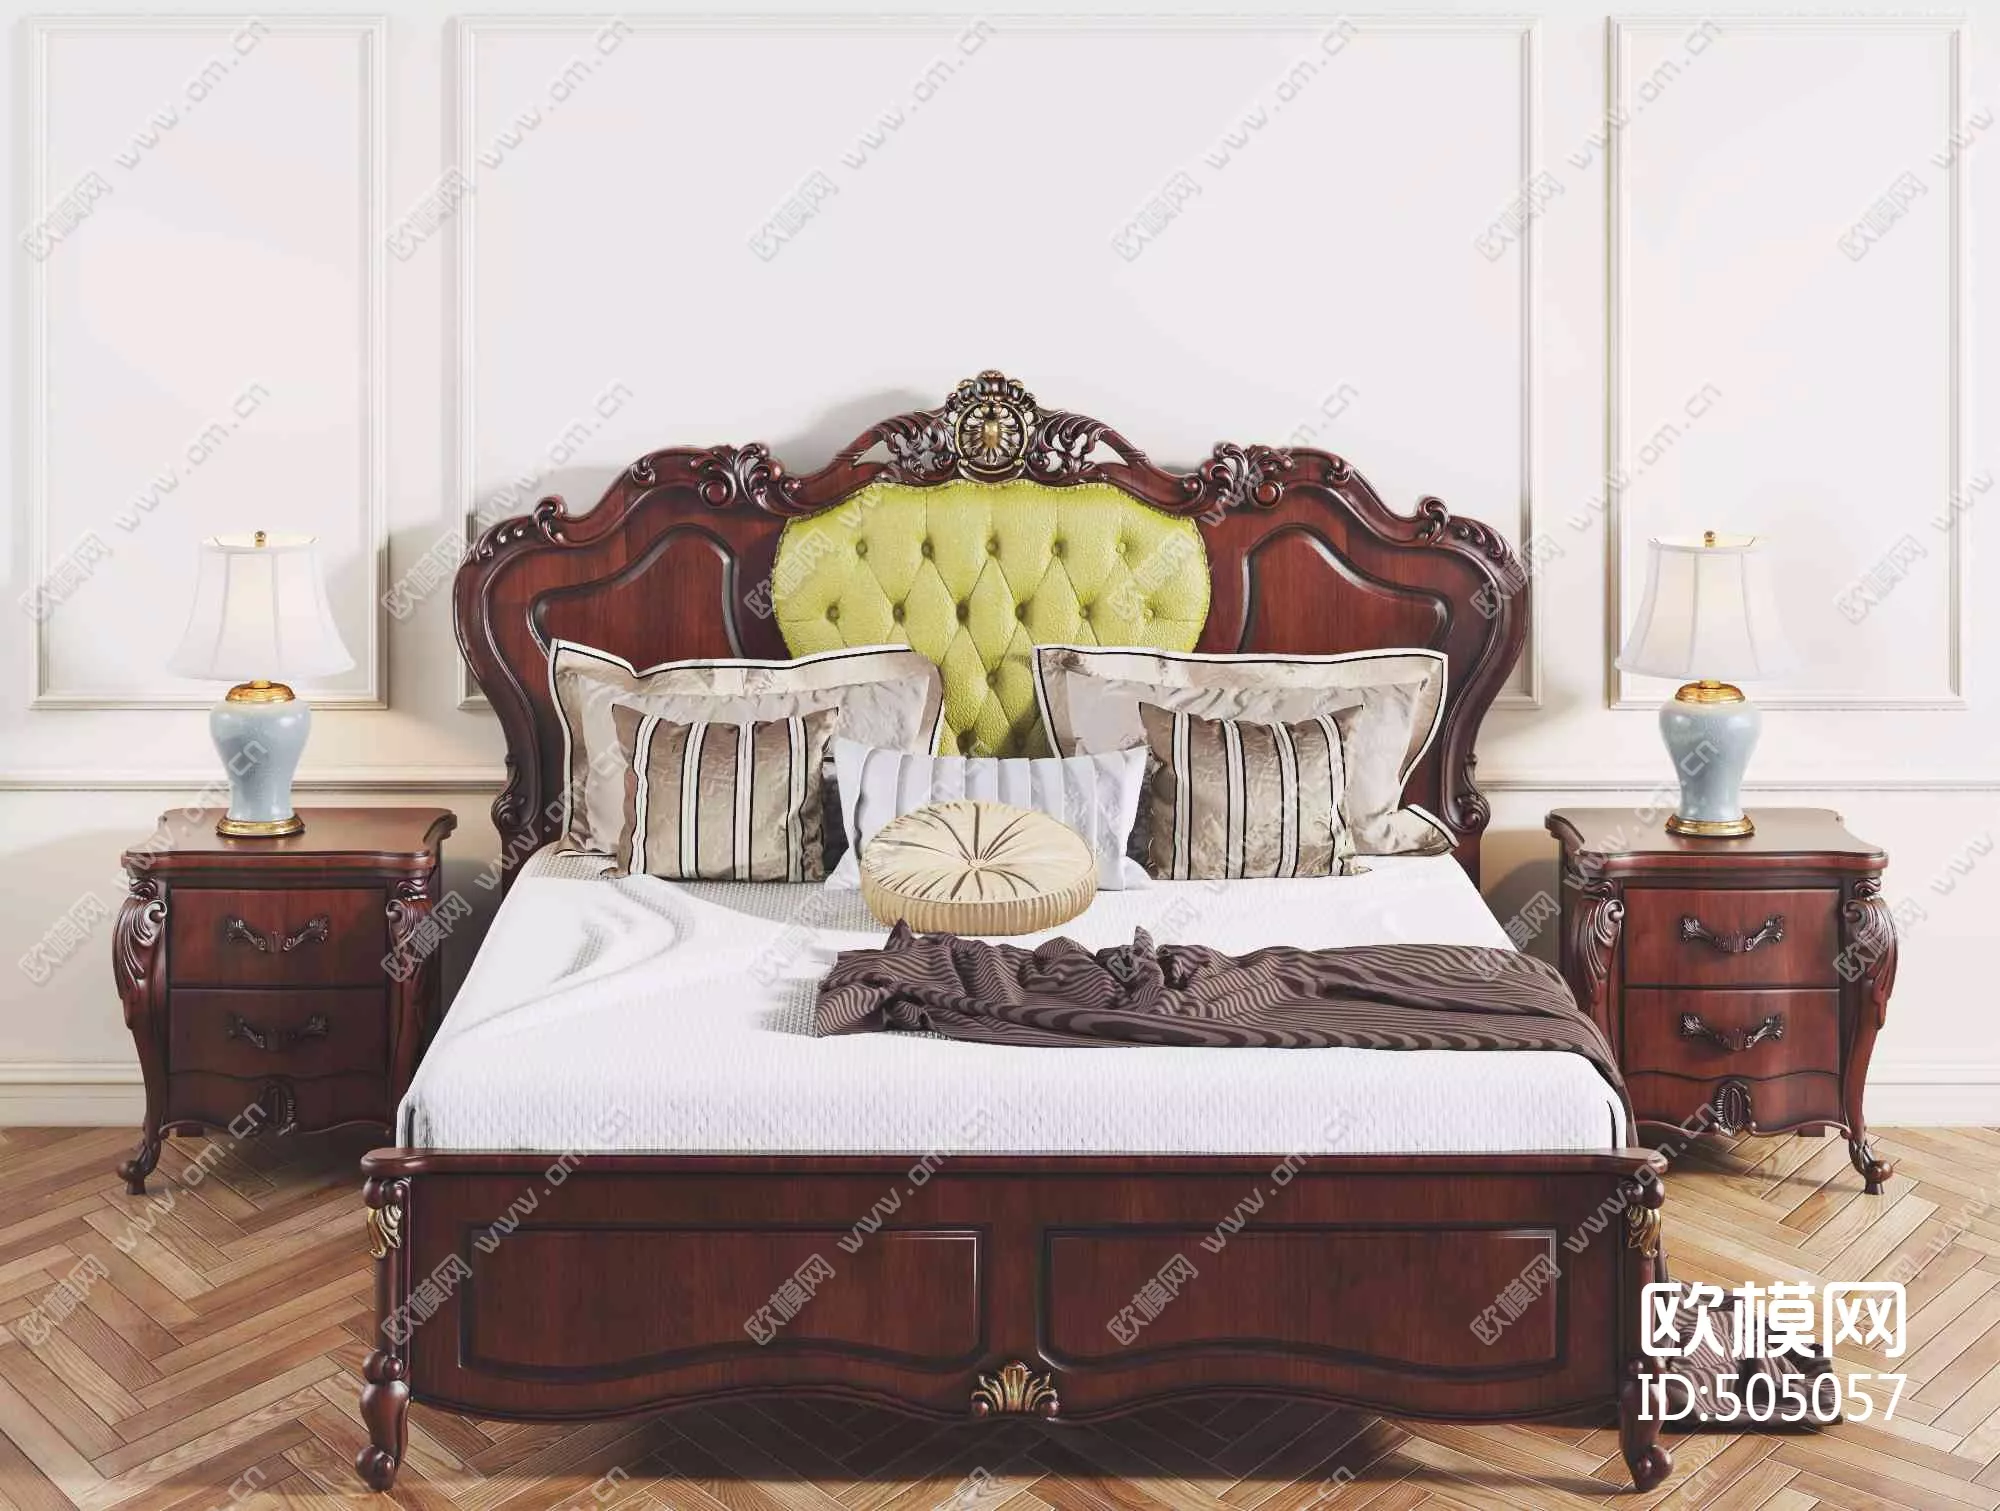 NEO CLASSIC BED - SKETCHUP 3D MODEL - VRAY OR ENSCAPE - ID17004